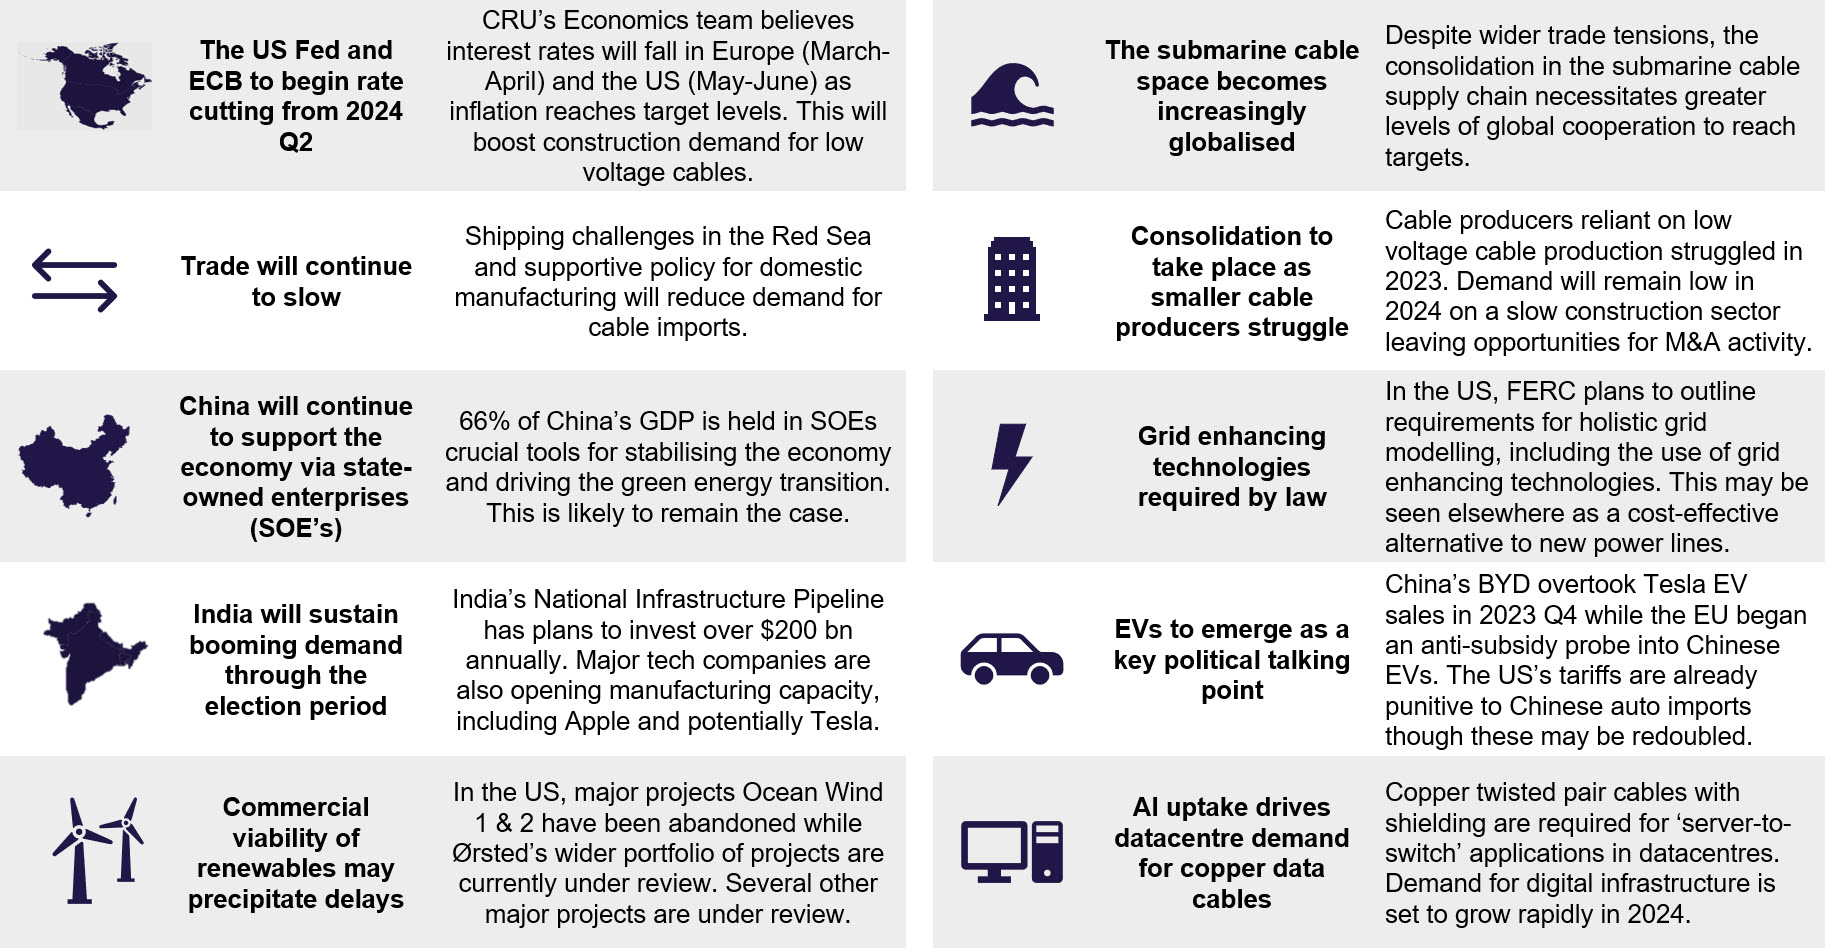 Table describing CRU's top ten calls for wire and cable in 2024